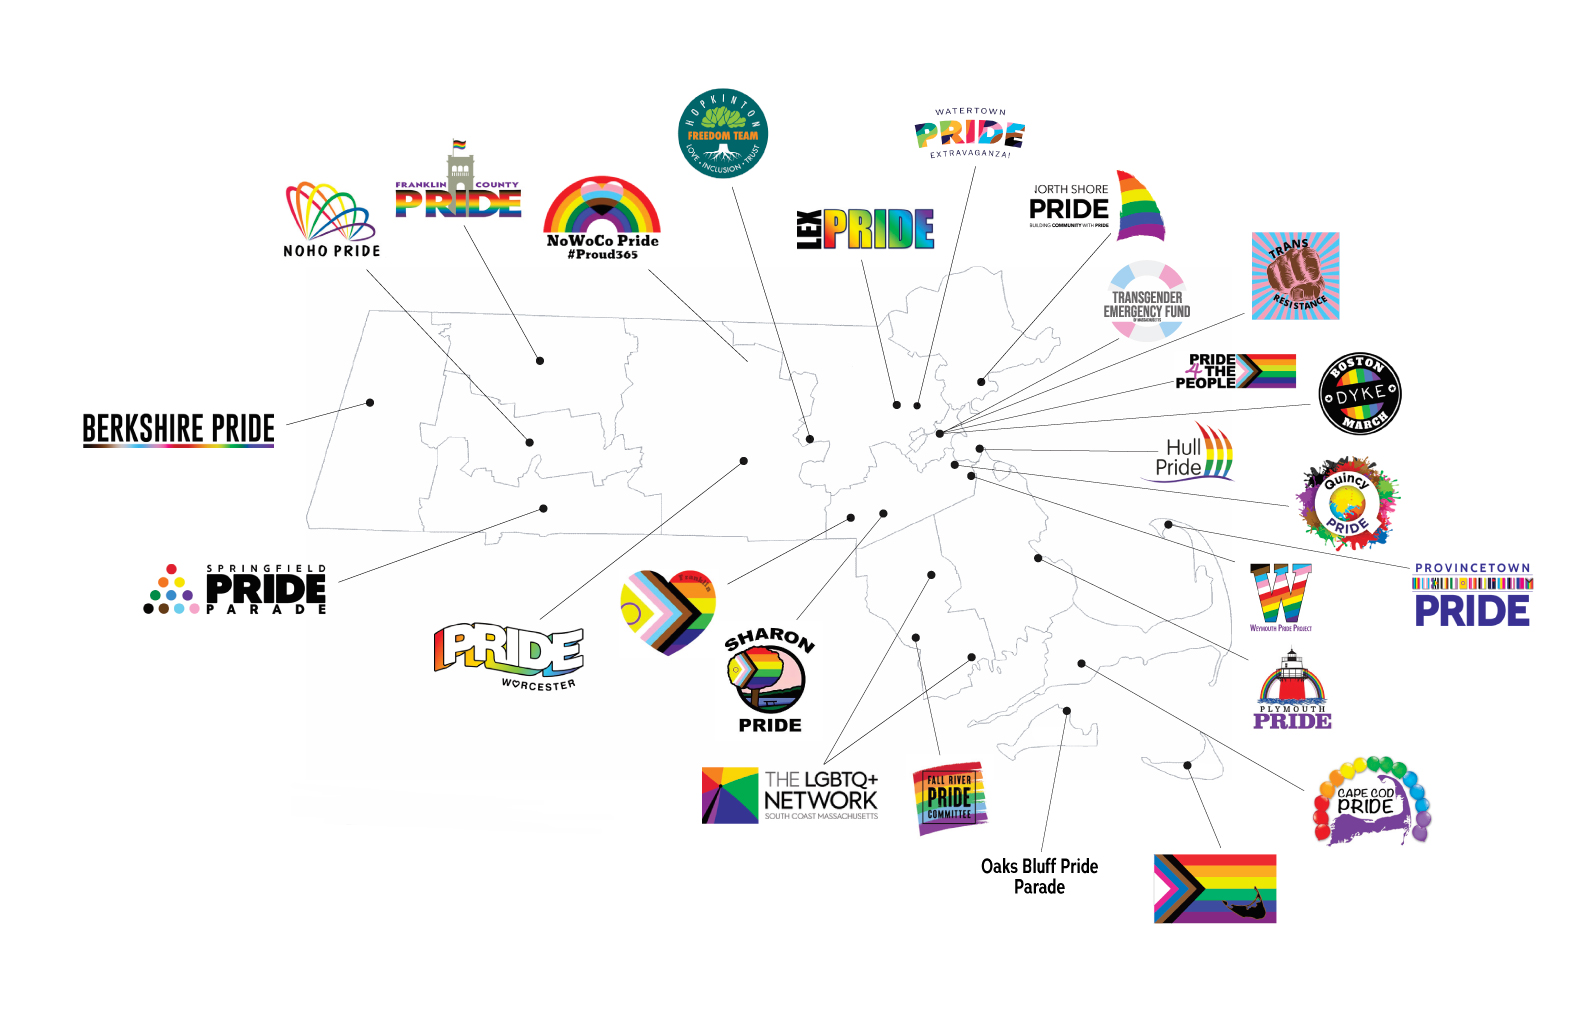 A map of Pride organizations across the state of MA